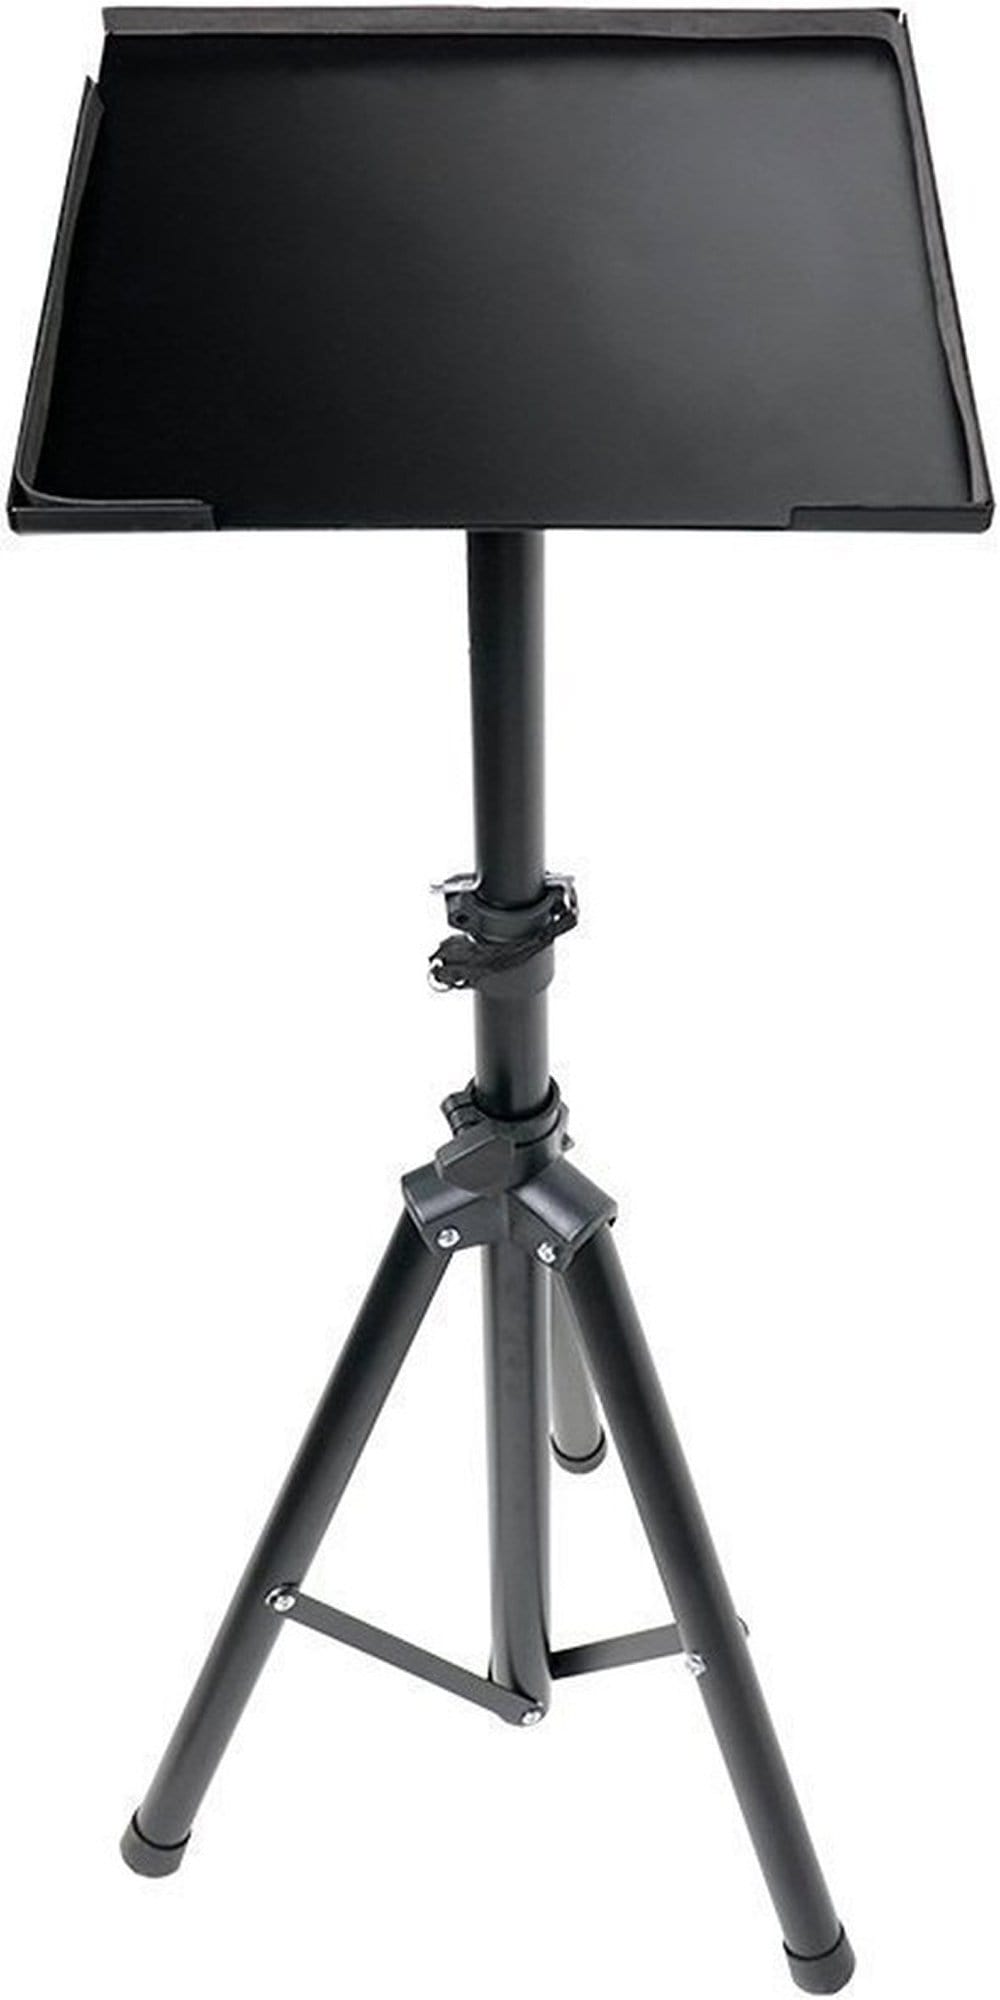 Gemini PST-01 Adjustable Projector or Laptop Stand - ProSound and Stage Lighting